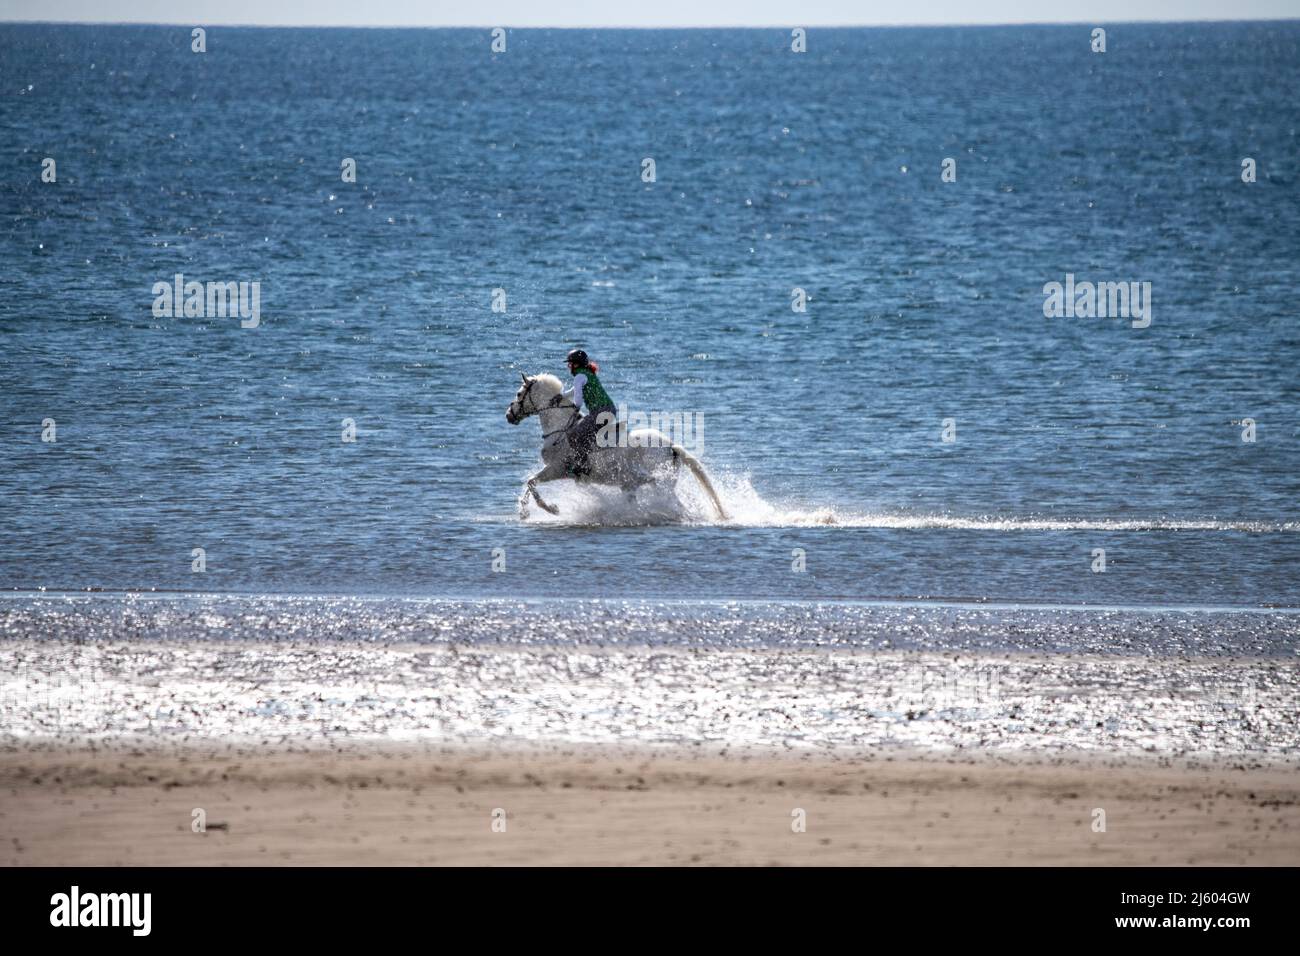 Ayr, Scotland, UK. 26th Apr, 2022. PICTURED: West of Scotland saw bright sunshine and blue sky at the seaside on Ayr Beach. People out walking and a horse rider takes their horse through a gallop in the cool sea water. Credit: Colin Fisher/Alamy Live News Stock Photo